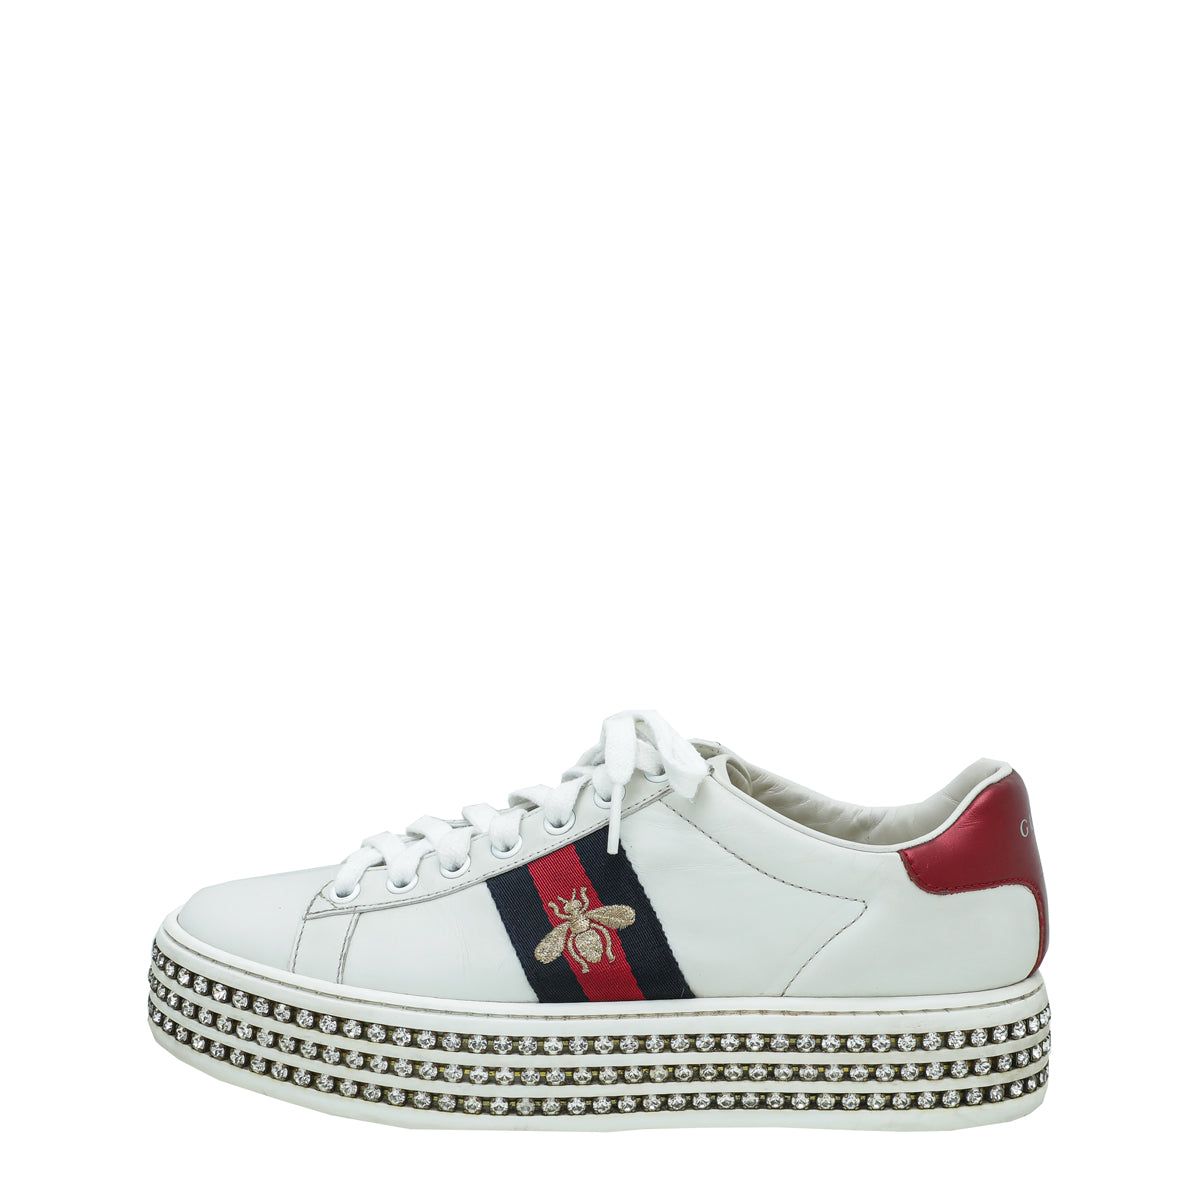 Gucci White Crystal Platform Ace Bee Sneakers 37